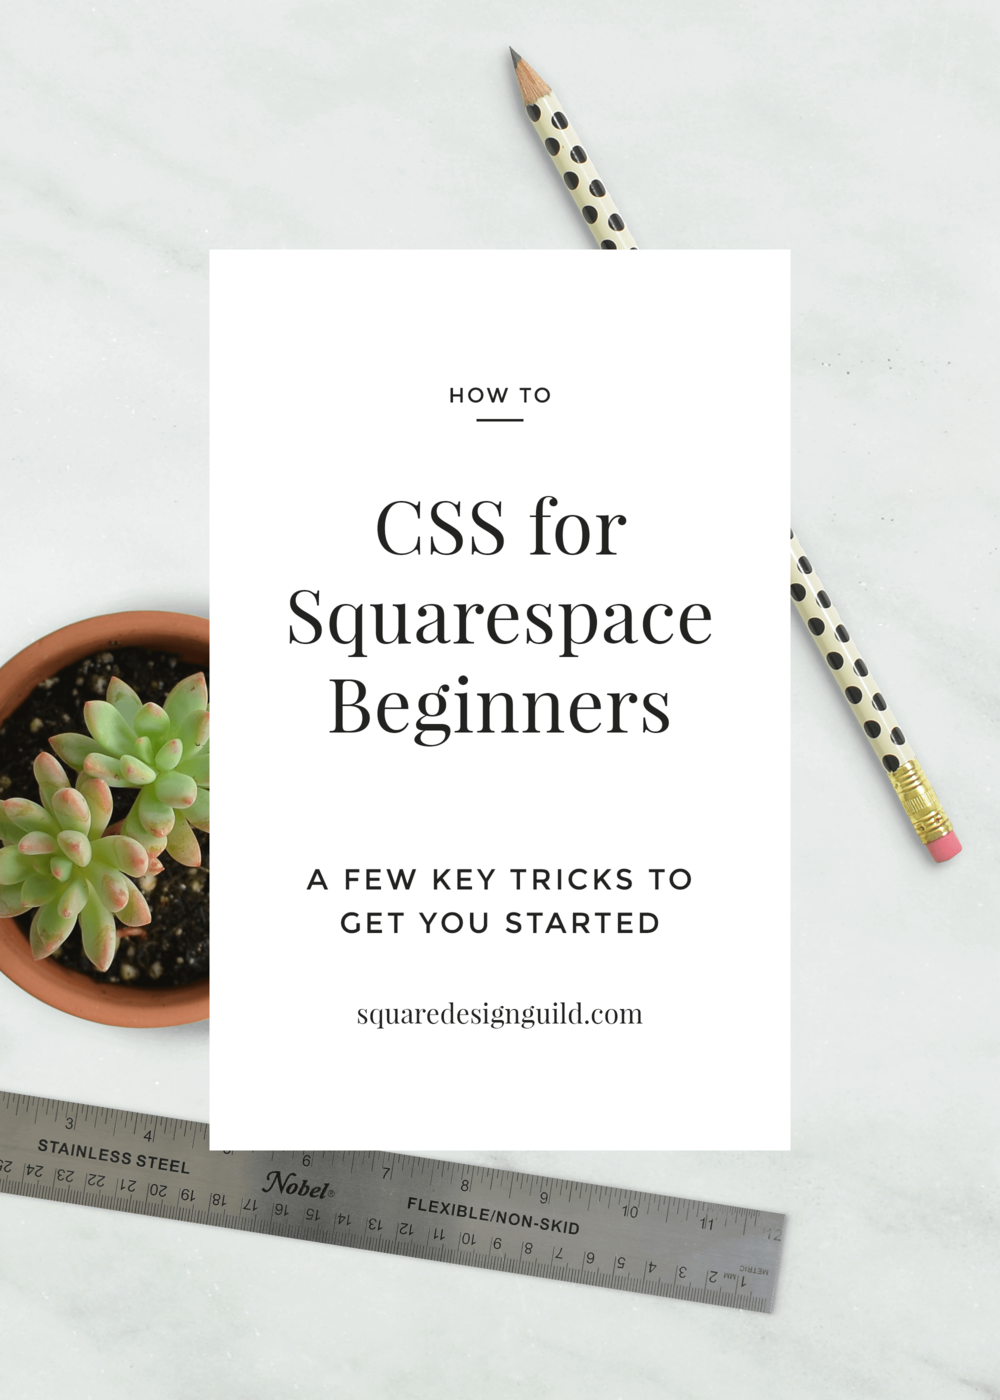 CSS+for+Squarespace+Beginners+|+A+Few+Tips+and+Tricks+to+Get+You+Started (1).png